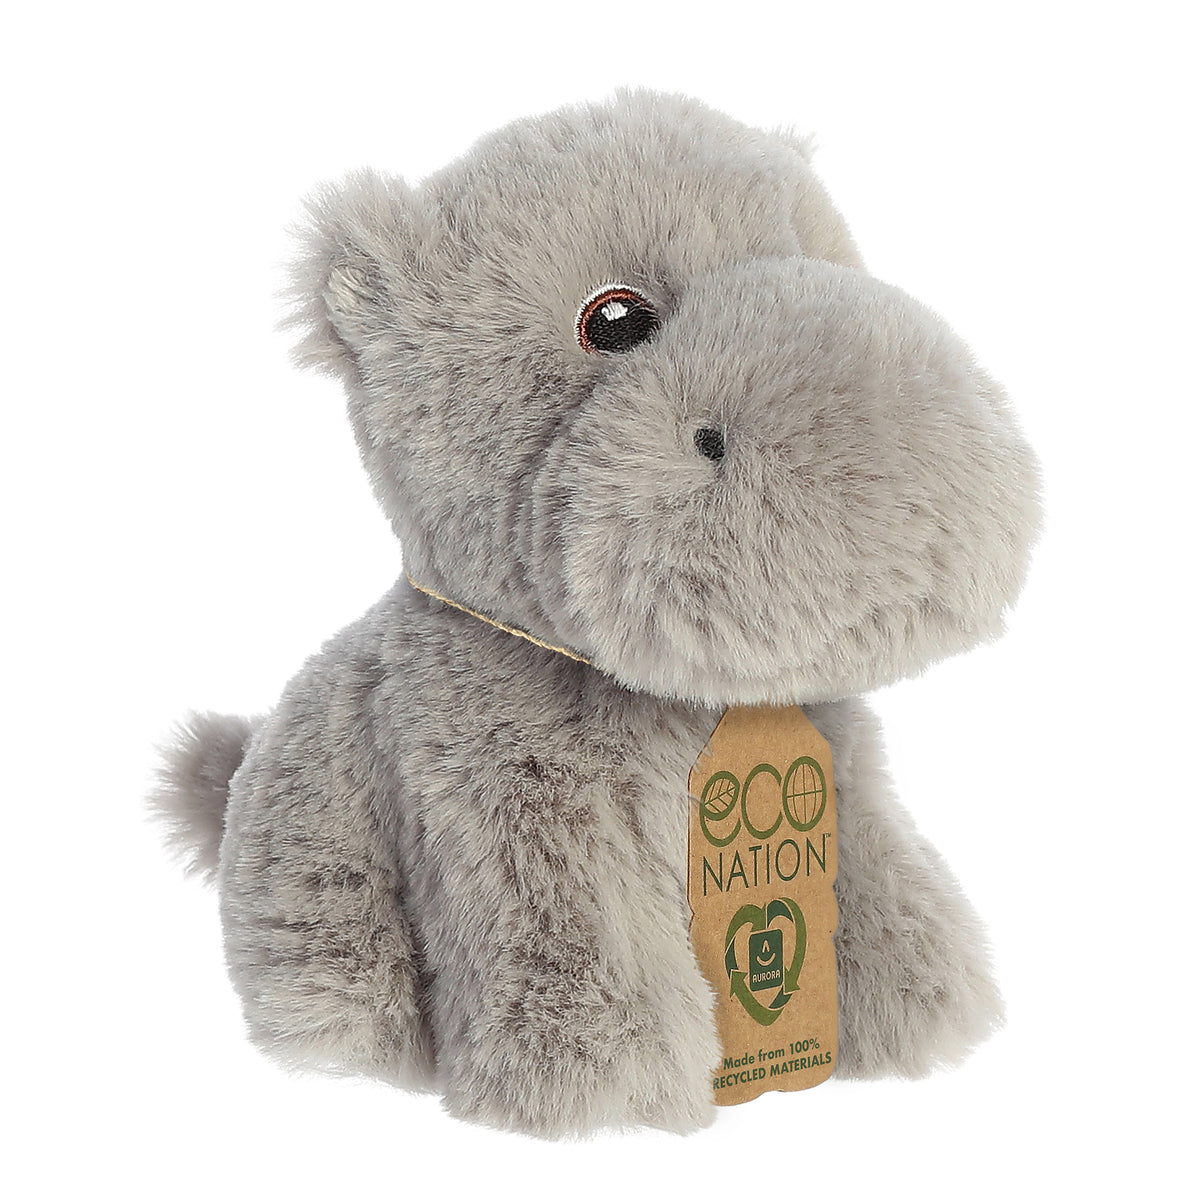 A hippopotamus plush resembling the real animal, with a rich grey coat, embroidered eyes, and an eco-nation tag.